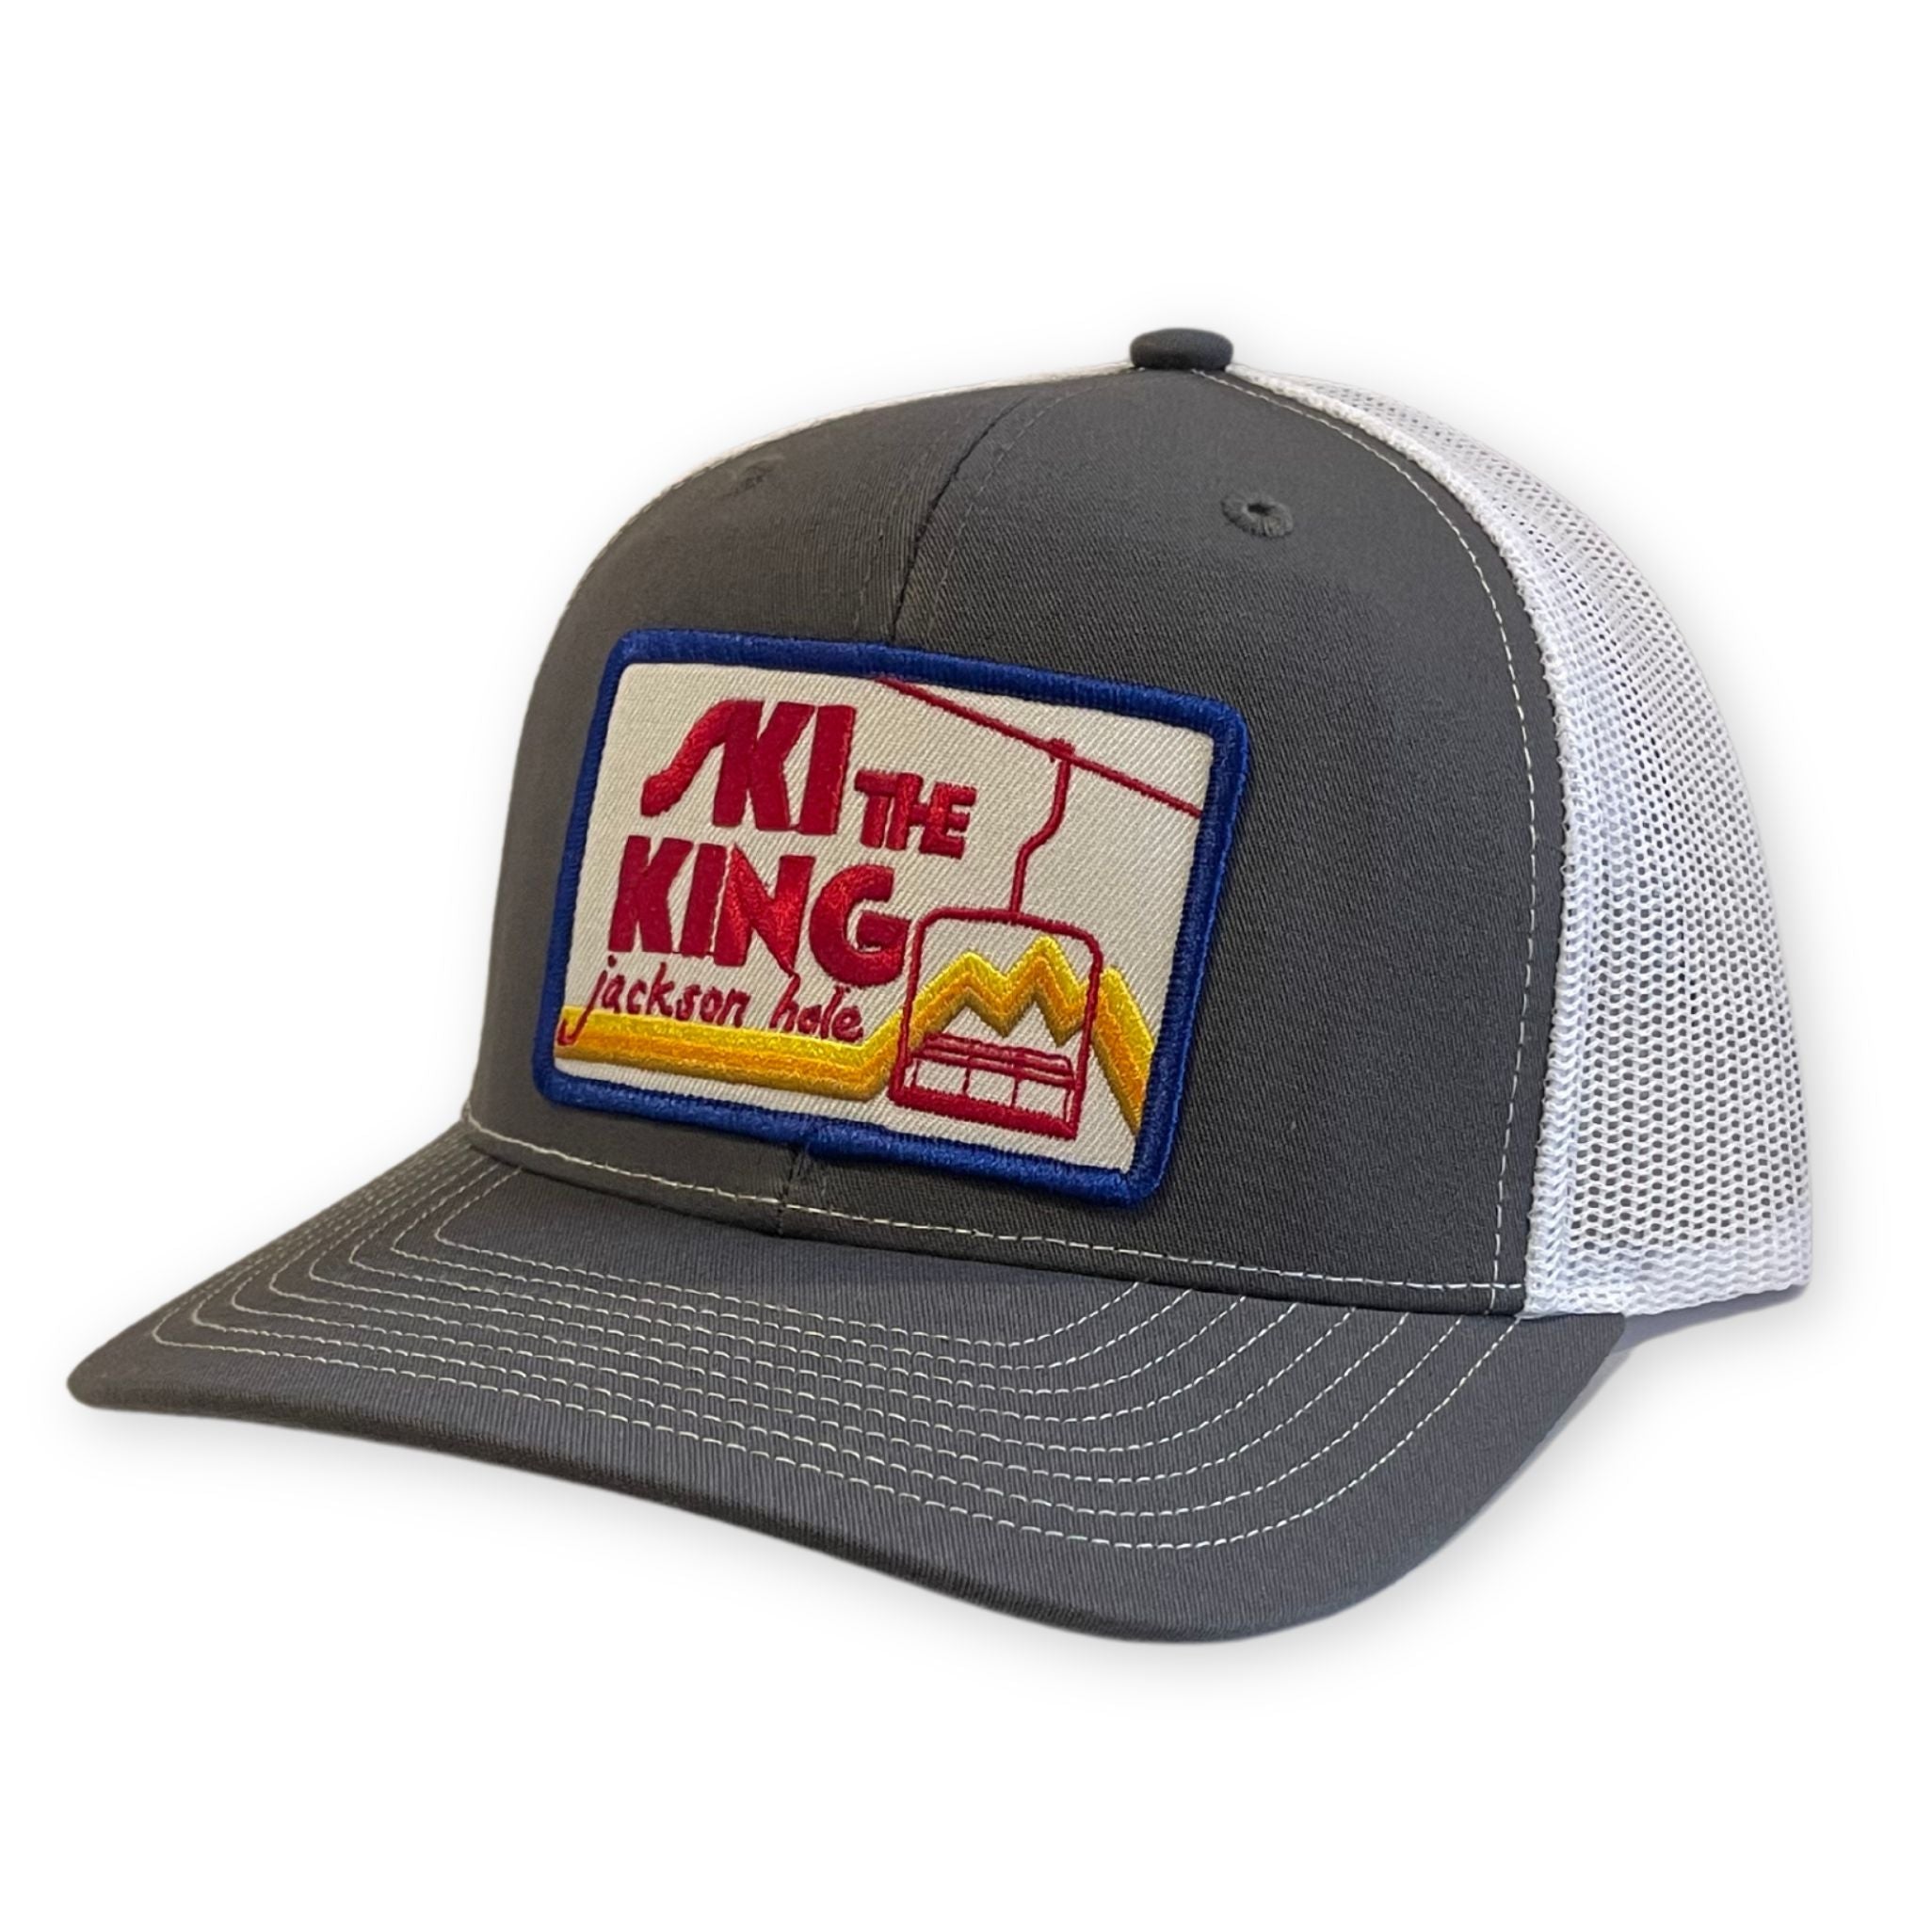 Gray Trucker Hat with White Mesh Back and a Ski the King Jackson Hole Patch 